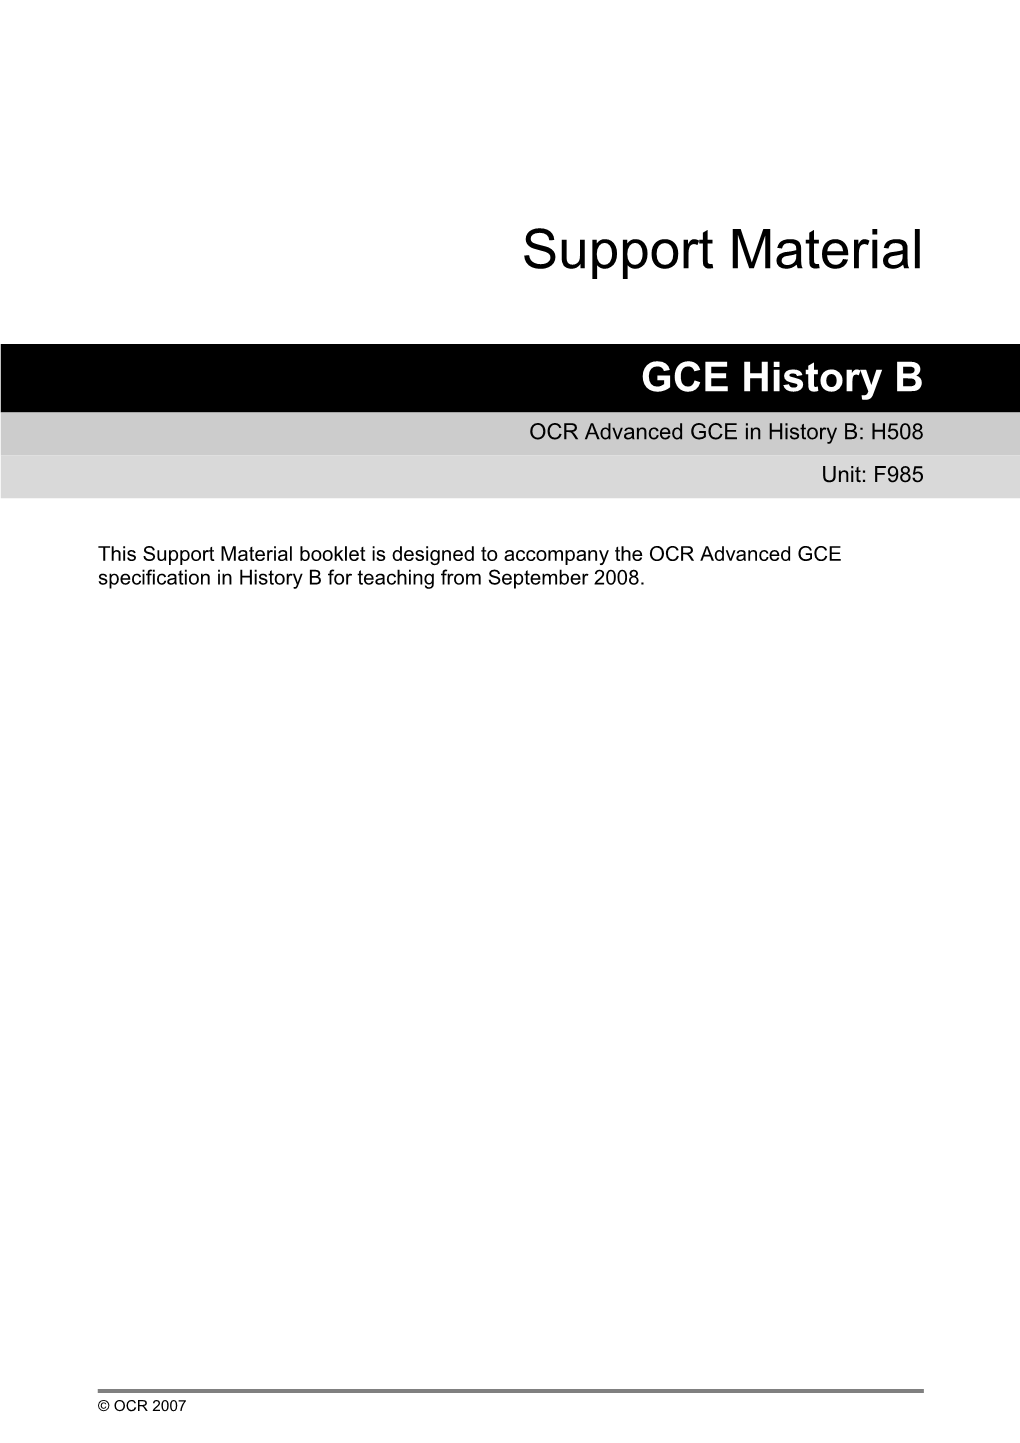 OCR Advanced GCE in History B: H508 s1